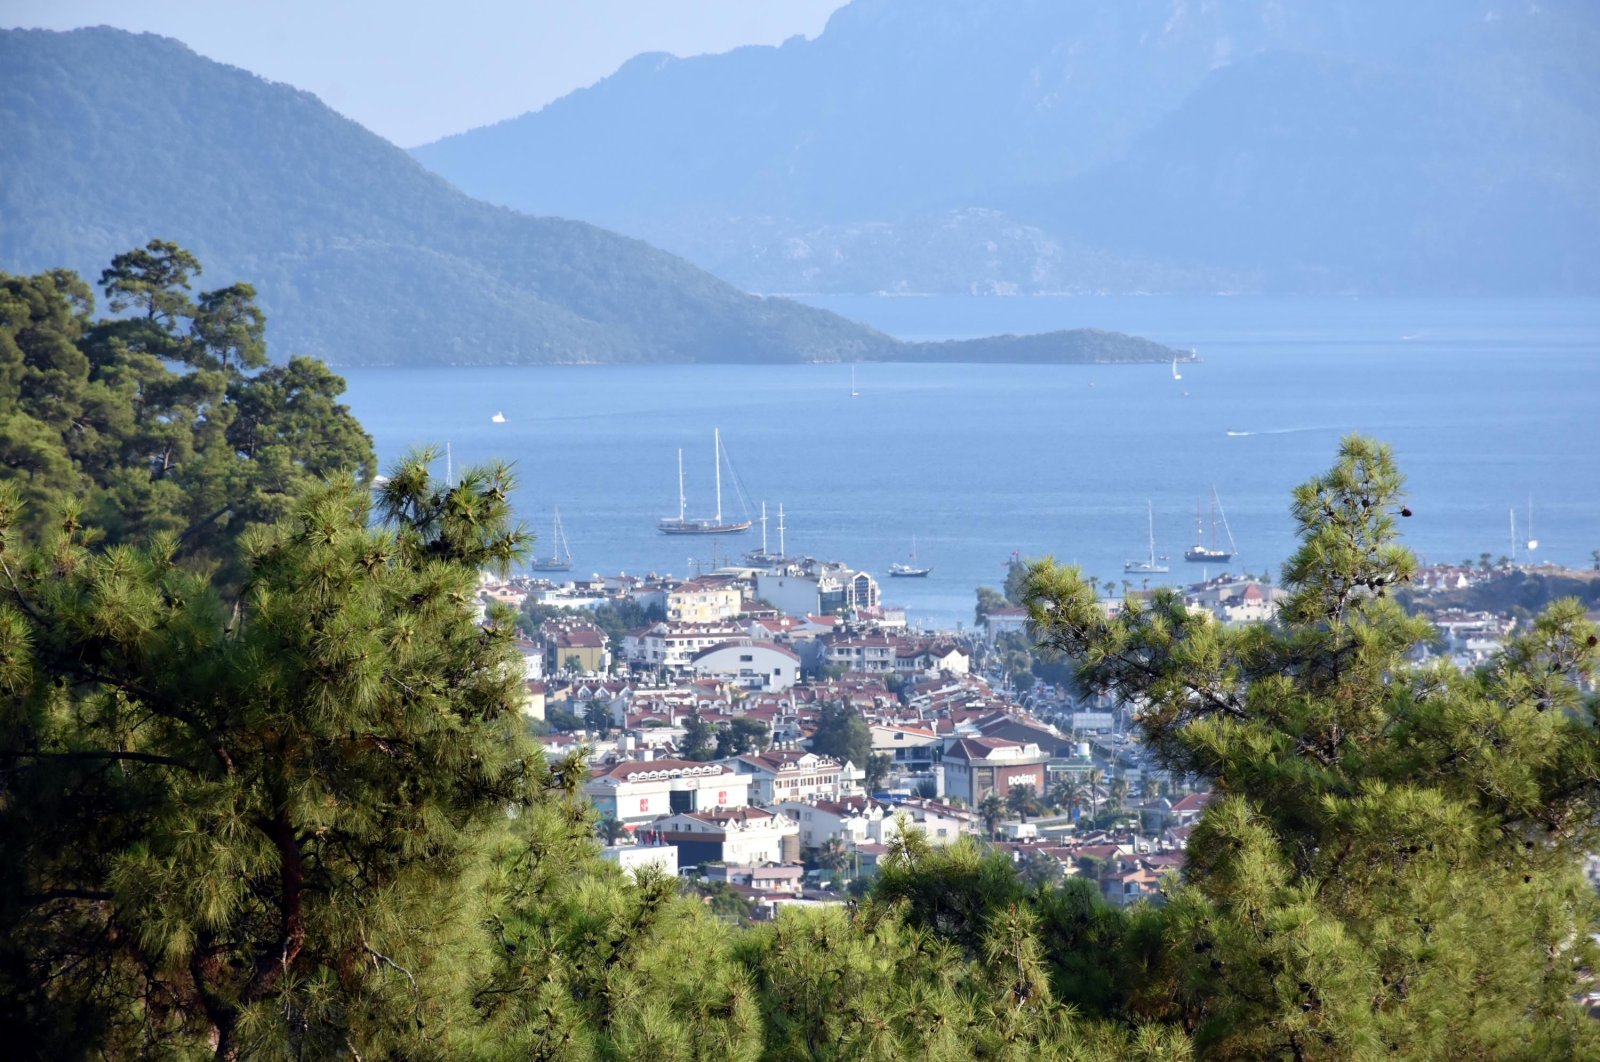 Houses and holiday resorts on the Mediterranean coast of Muğla province's Marmaris district, Turkey, July 22, 2020. (DHA Photo)

